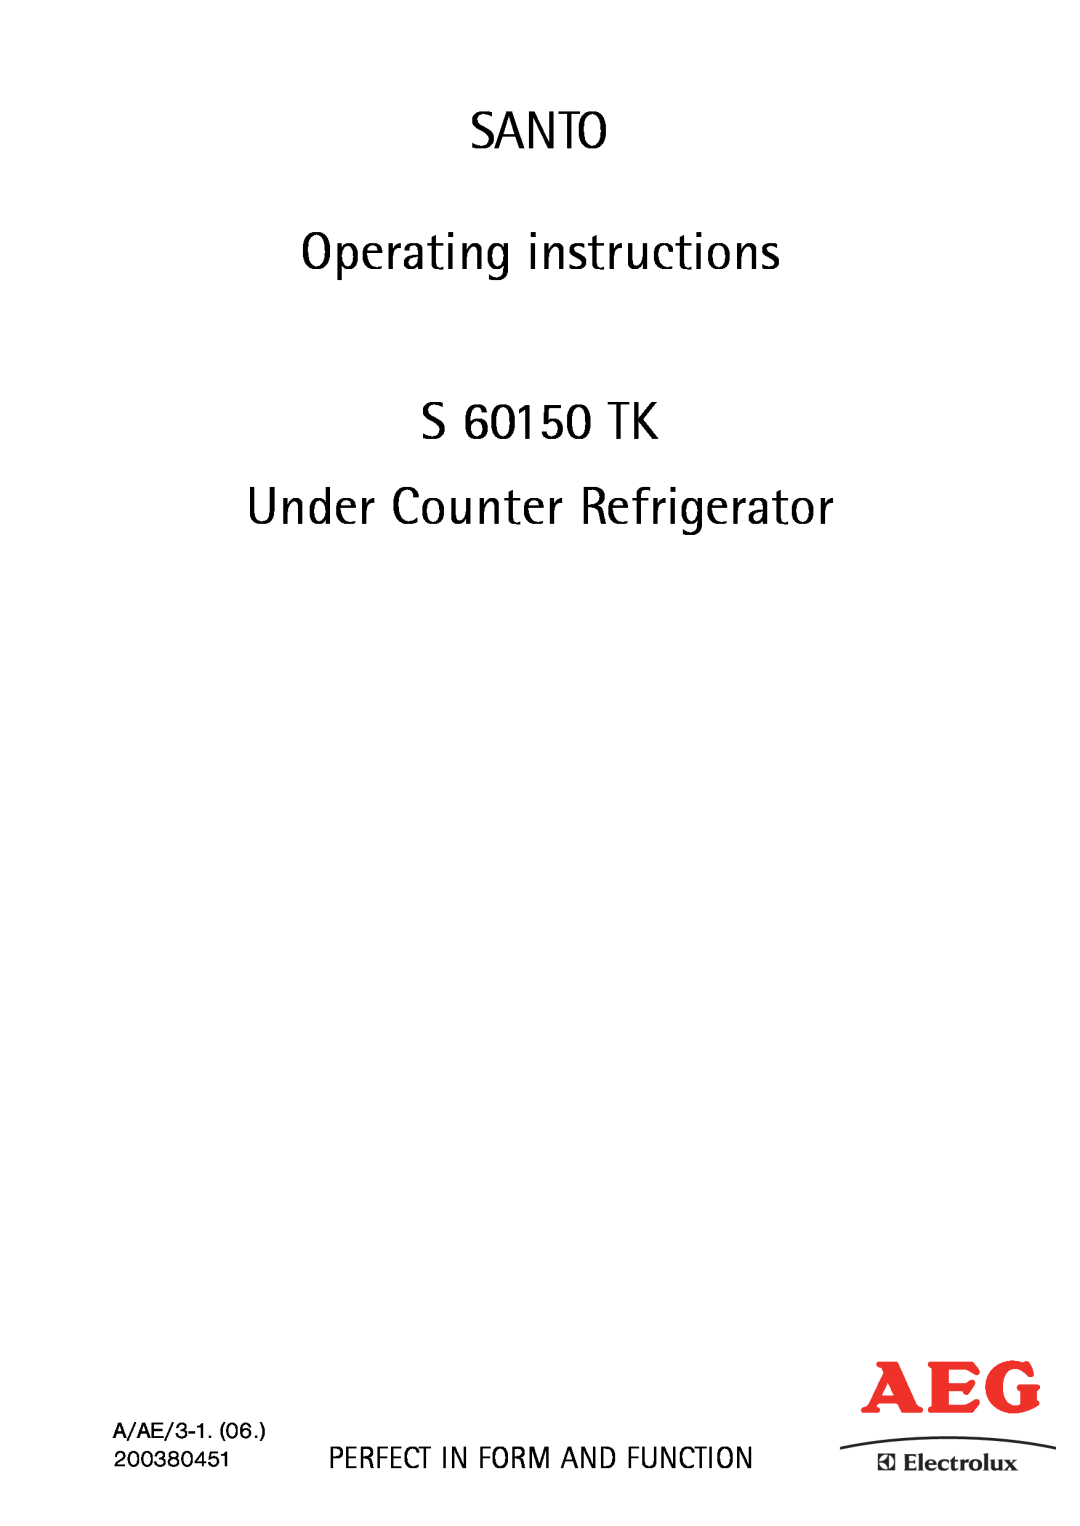 AEG manual SANTO Operating instructions S 60150 TK Under Counter Refrigerator, Perfect In Form And Function 